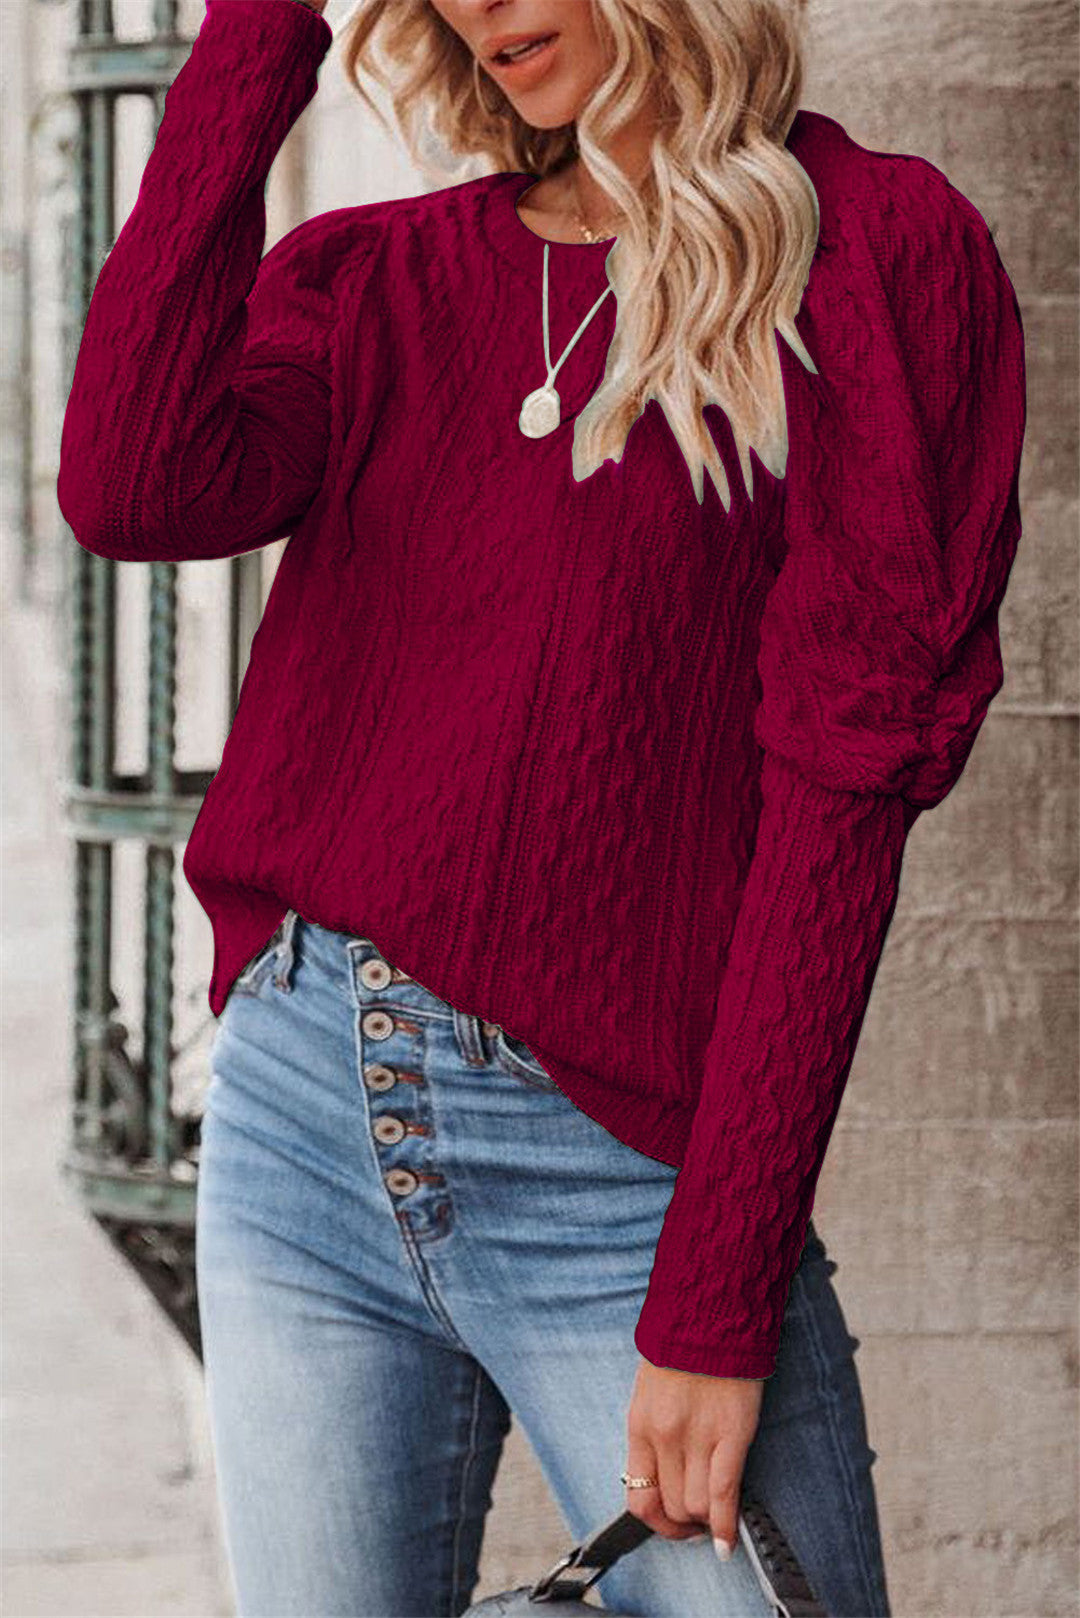 Women's Solid Color Jacquard Round Neck Gigot Sleeve Knitted Sweater Top | Nowena